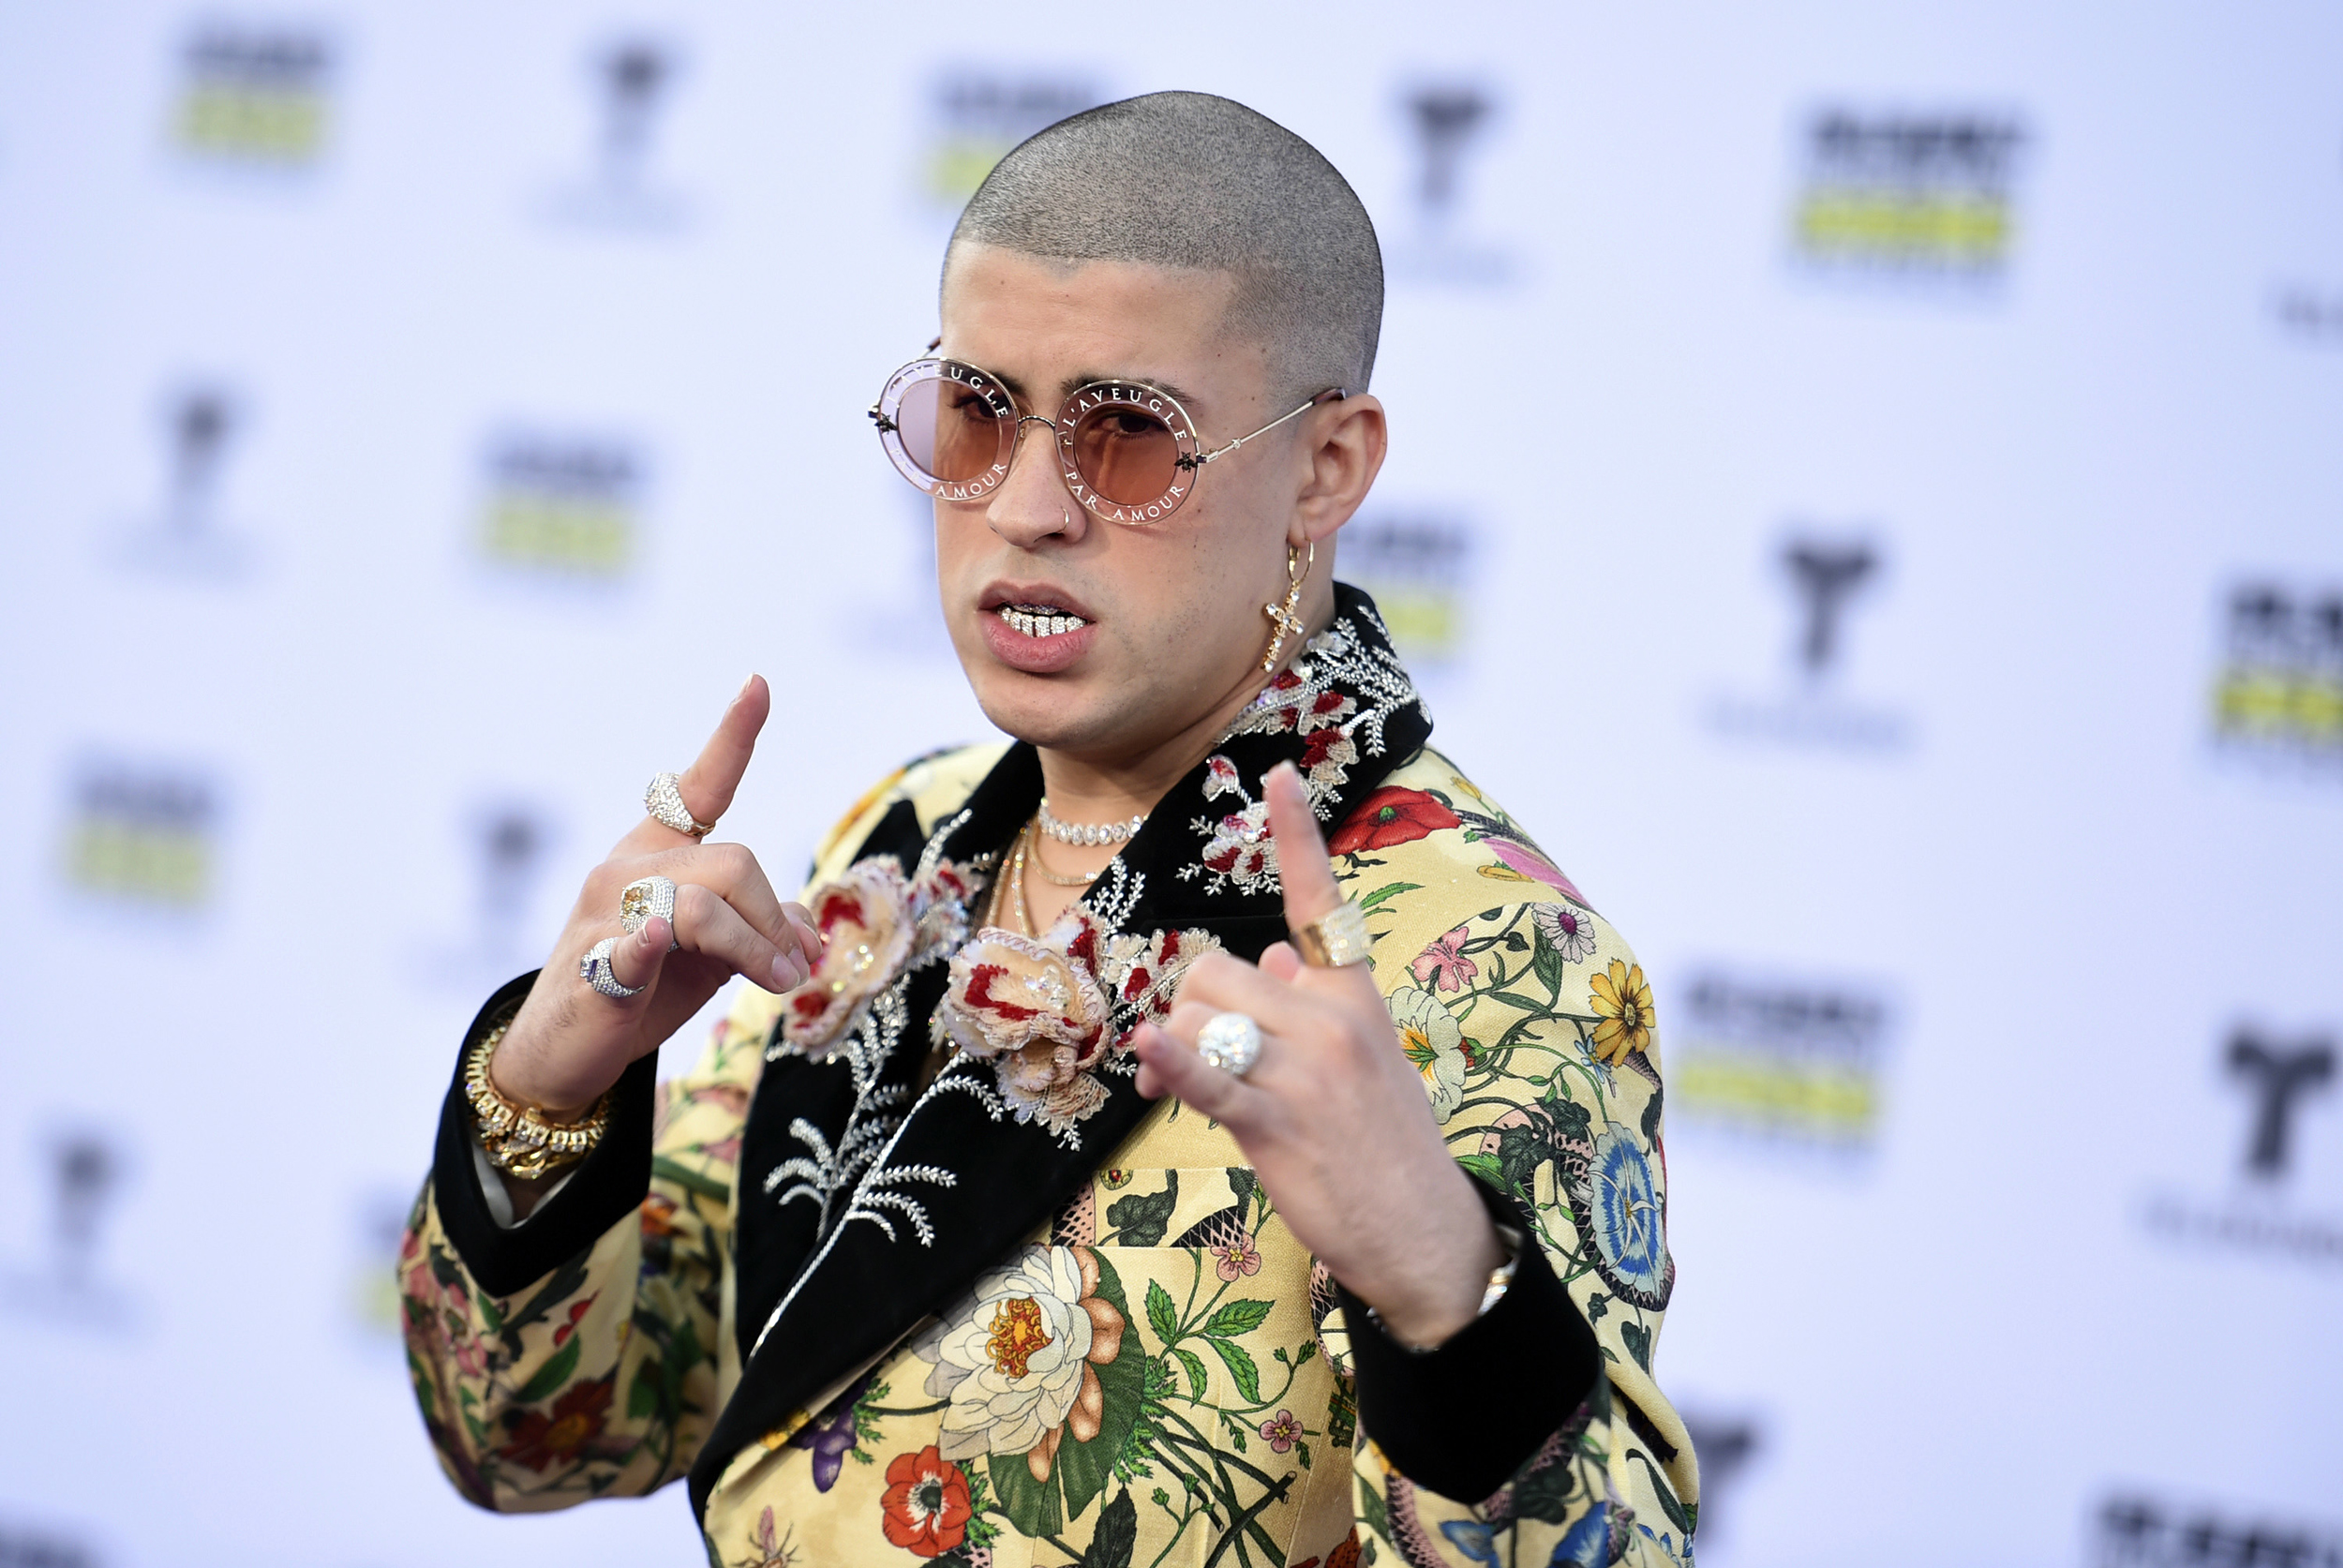 Did you know about Bad Bunny